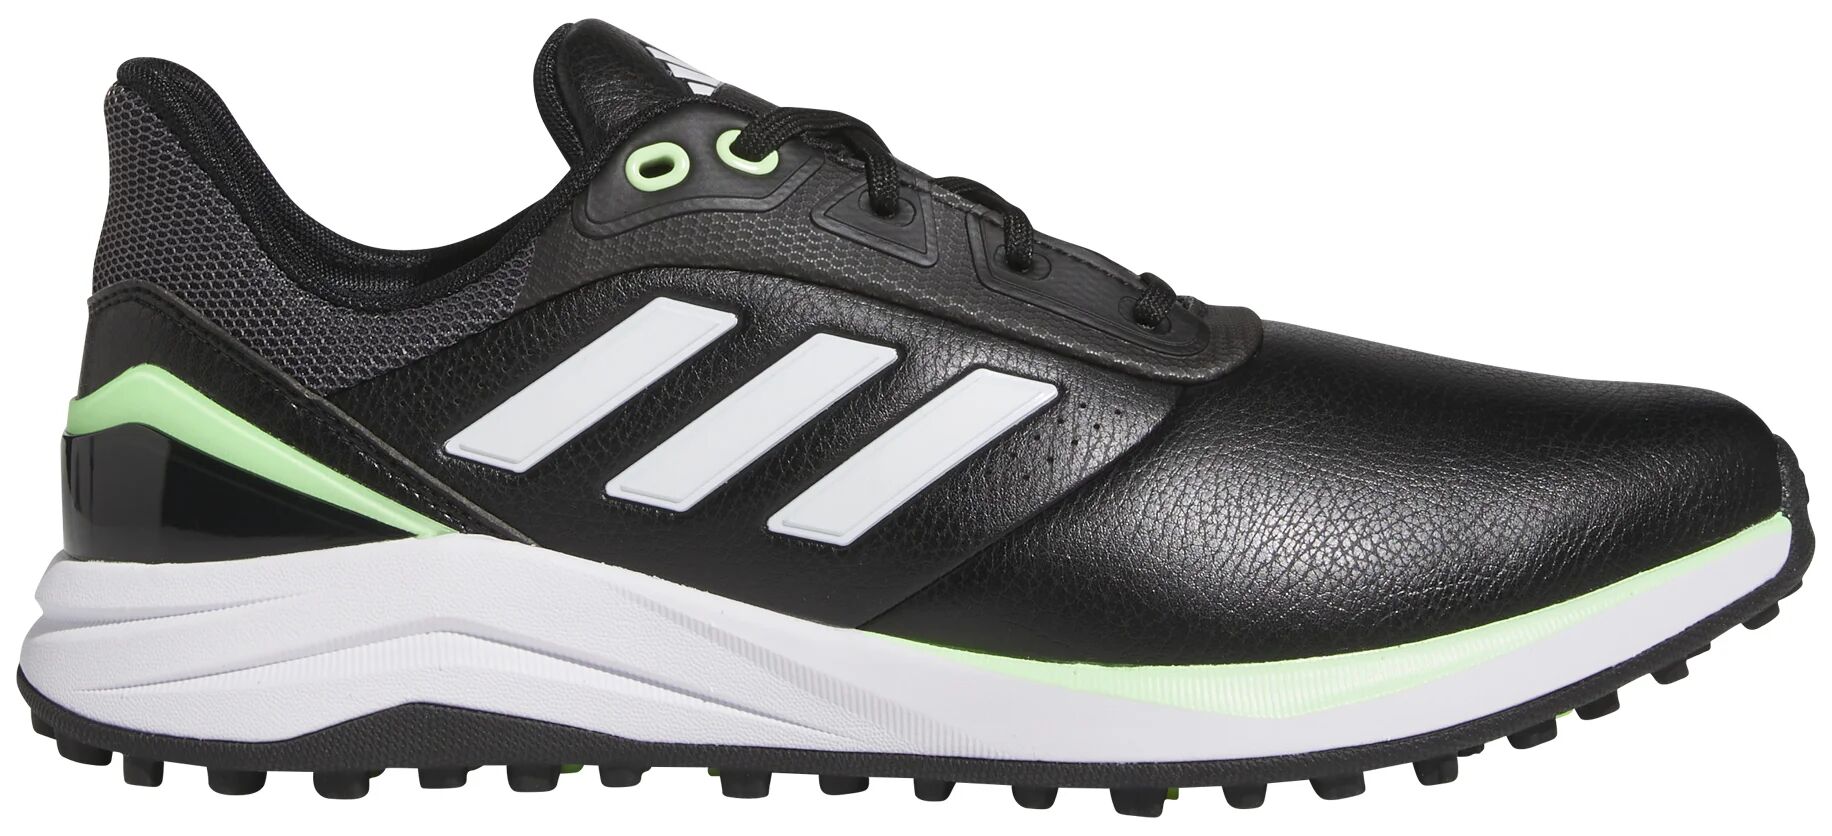 adidas Solarmotion Spikeless 24 Golf Shoes - Core Black/Cloud White/Green Spark - 11 - WIDE